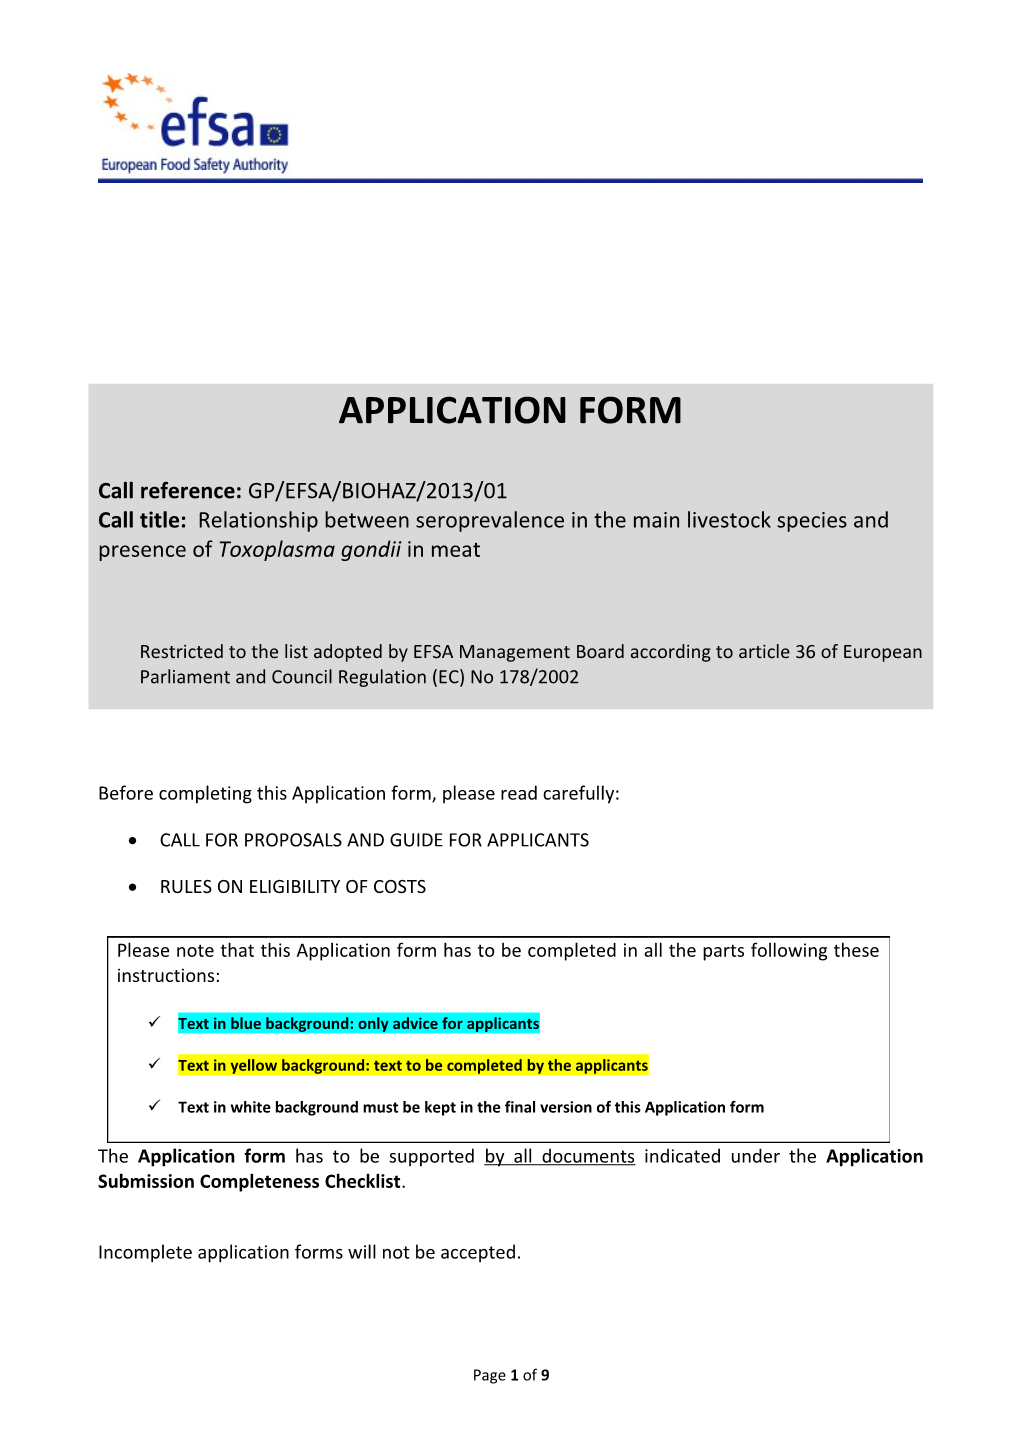 Before Completing This Application Form, Please Read Carefully